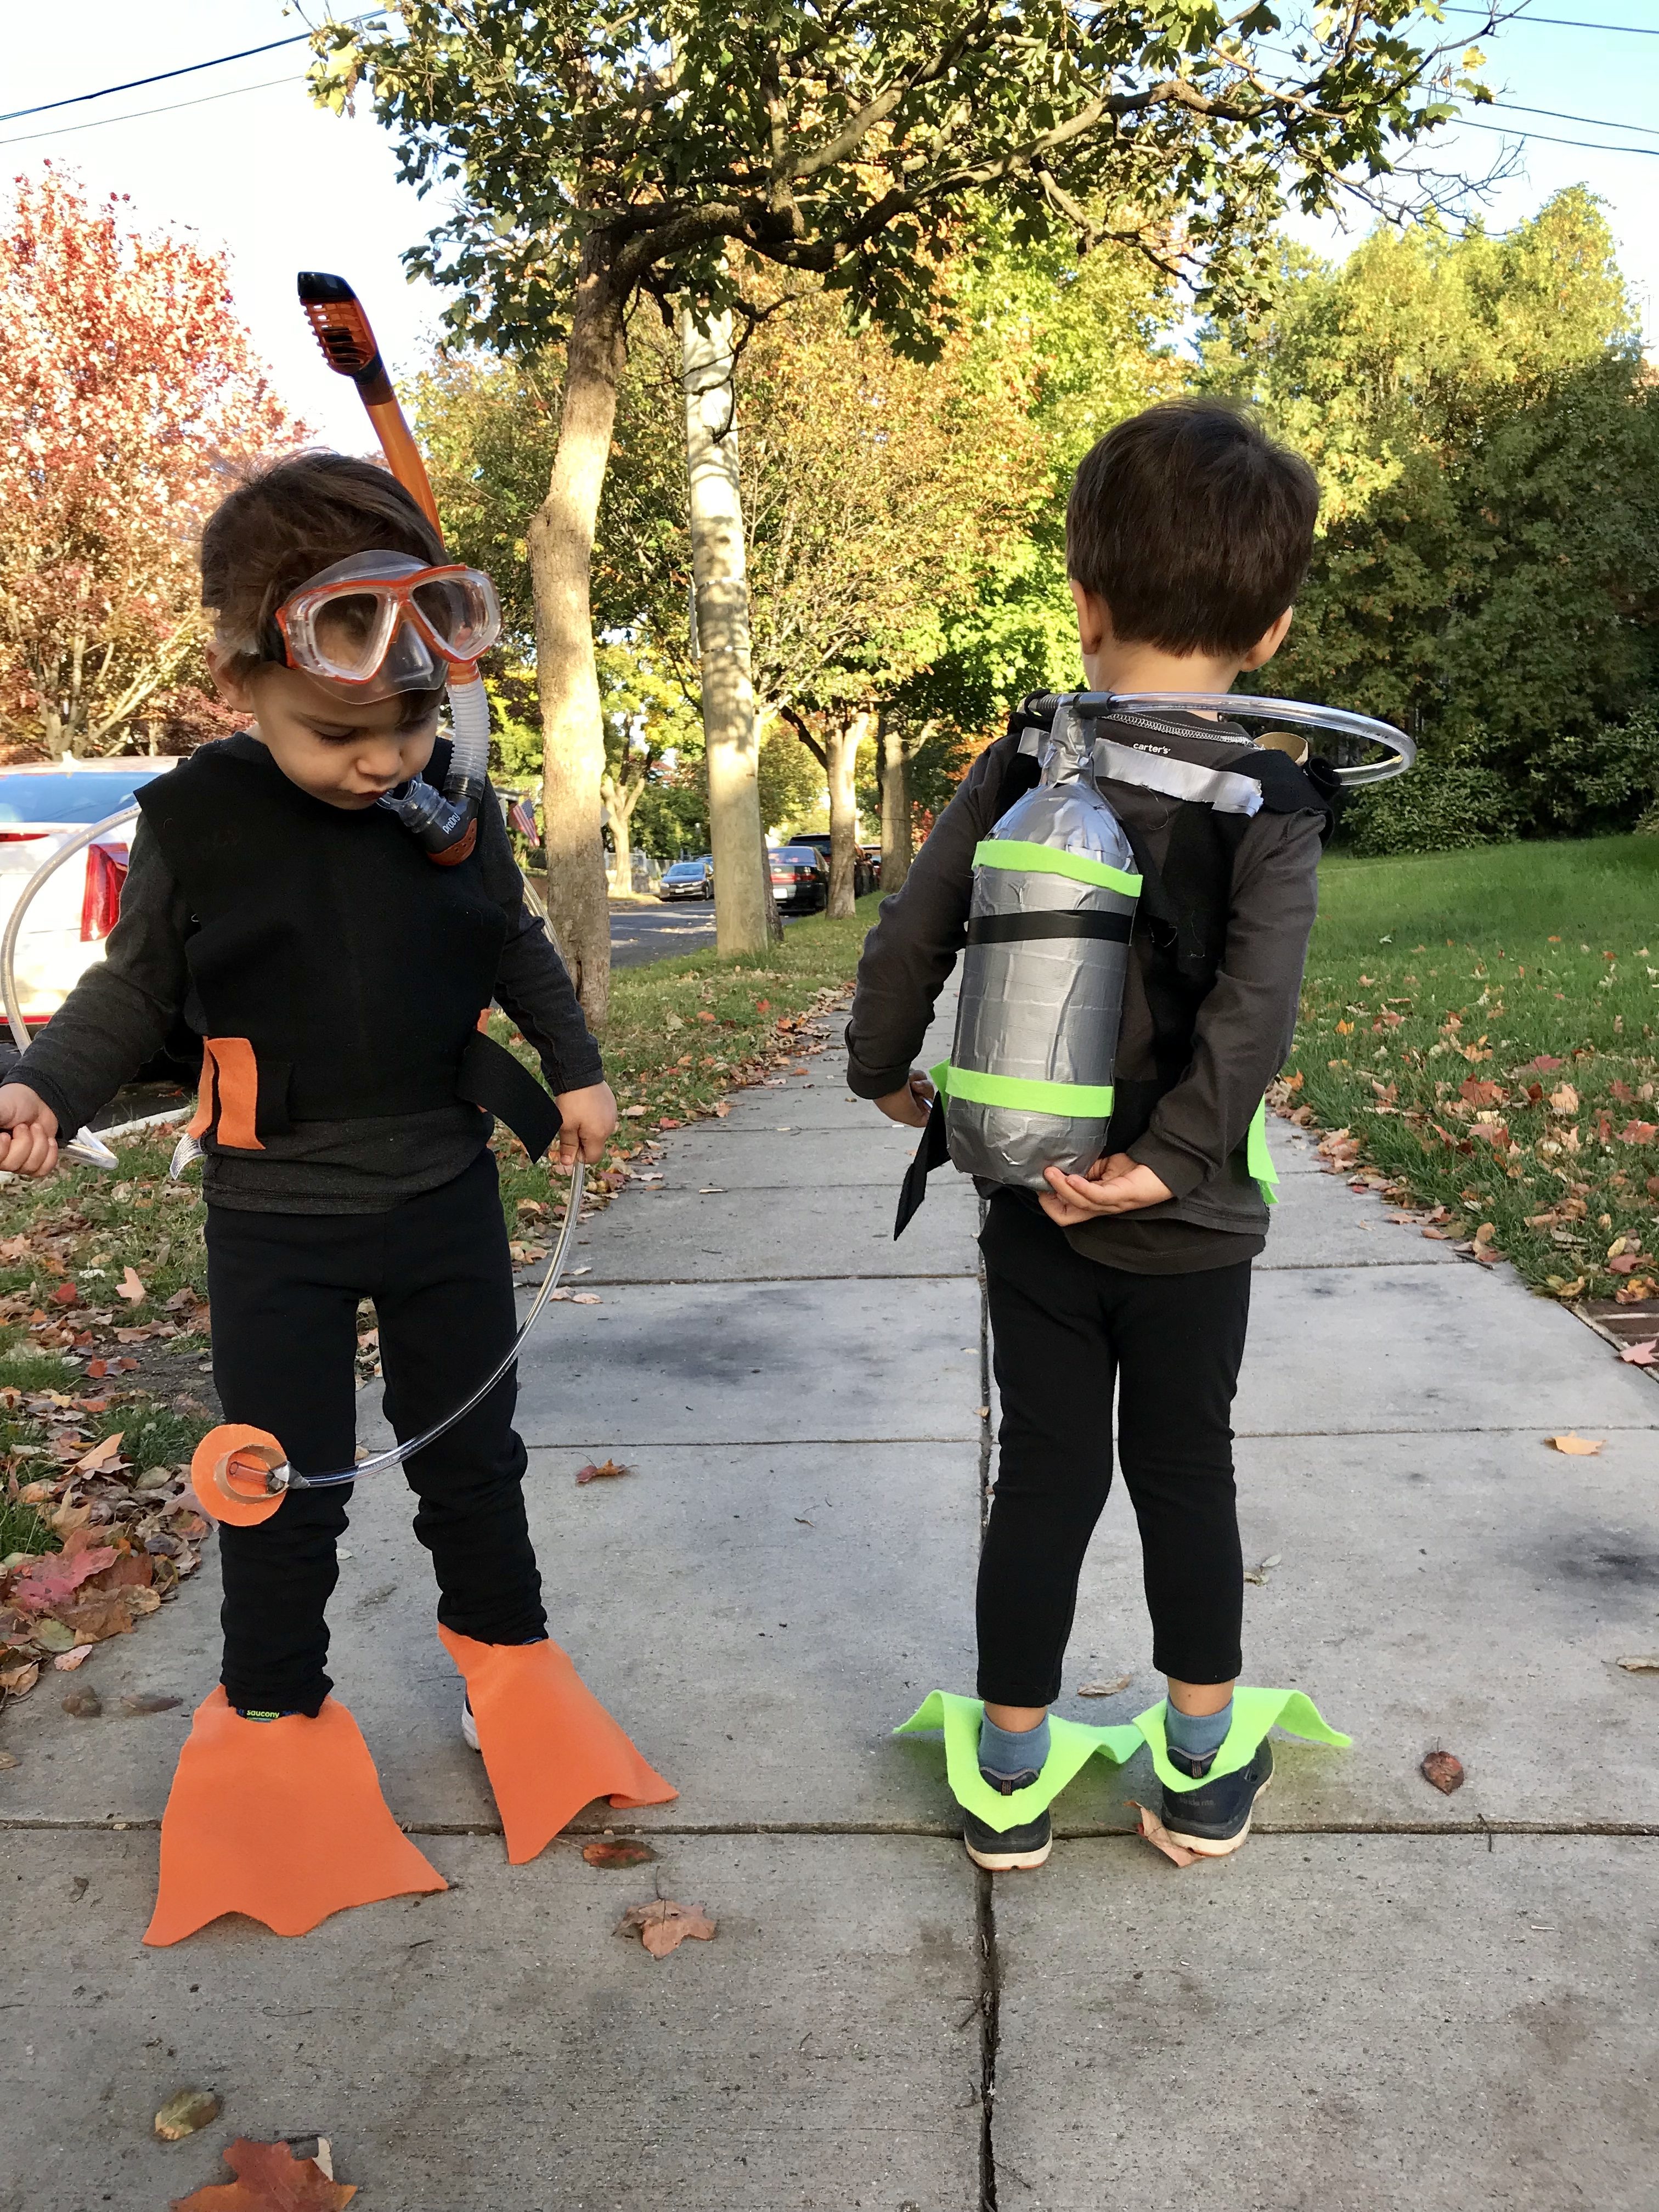 The kids created their own costumes with duct tape and felt